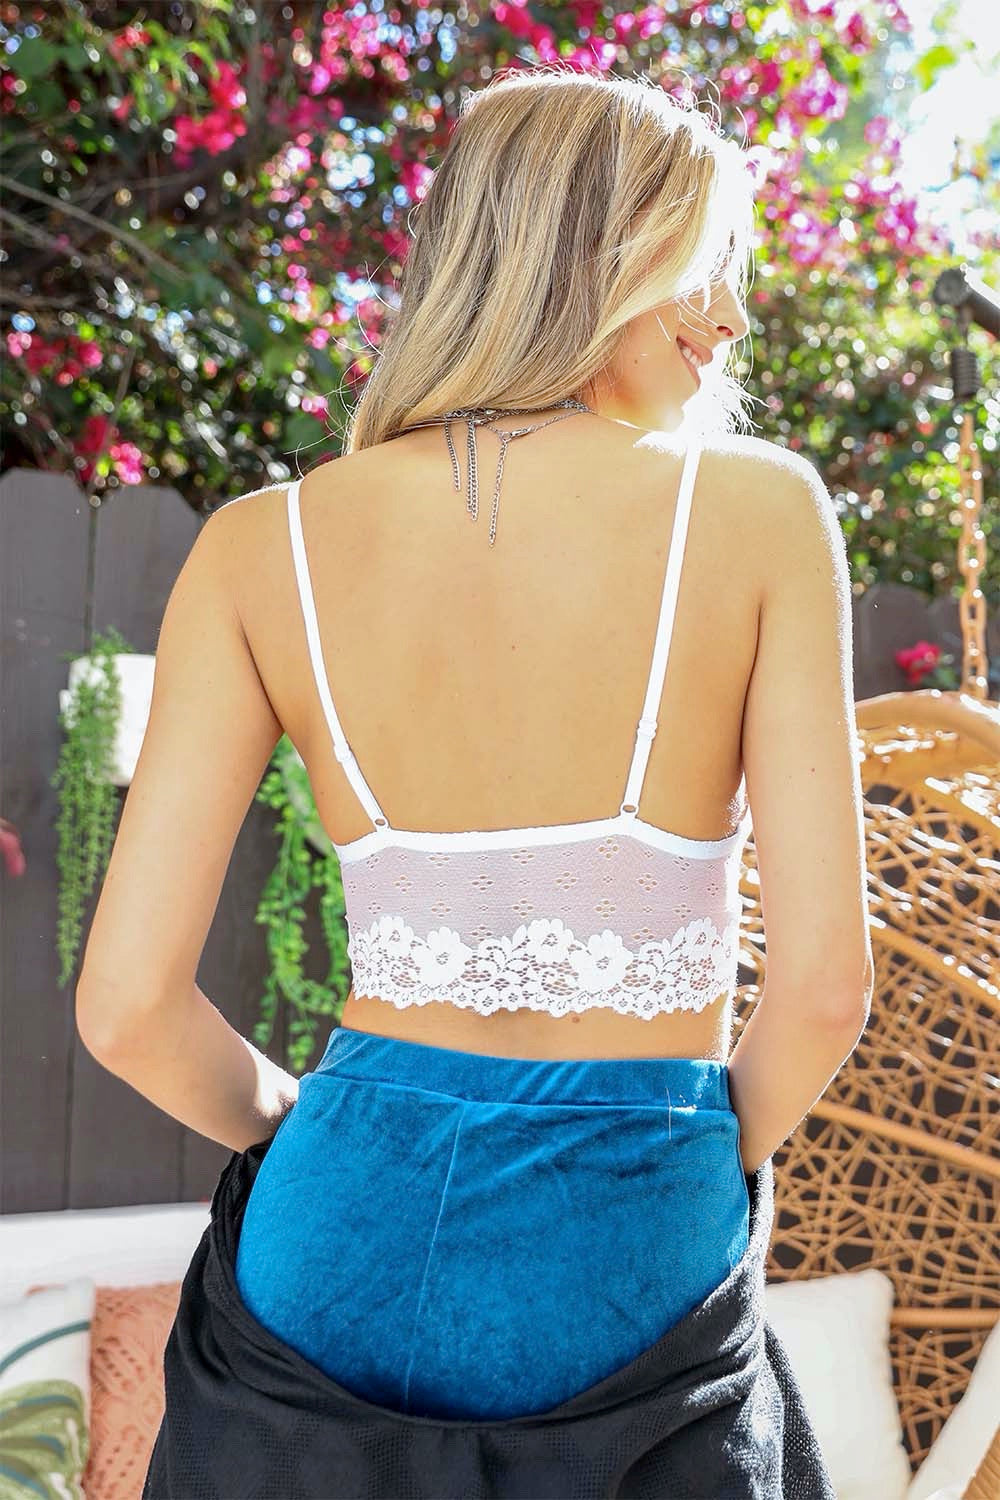 Racerback Flower Lace Bralette Padded – Thank you